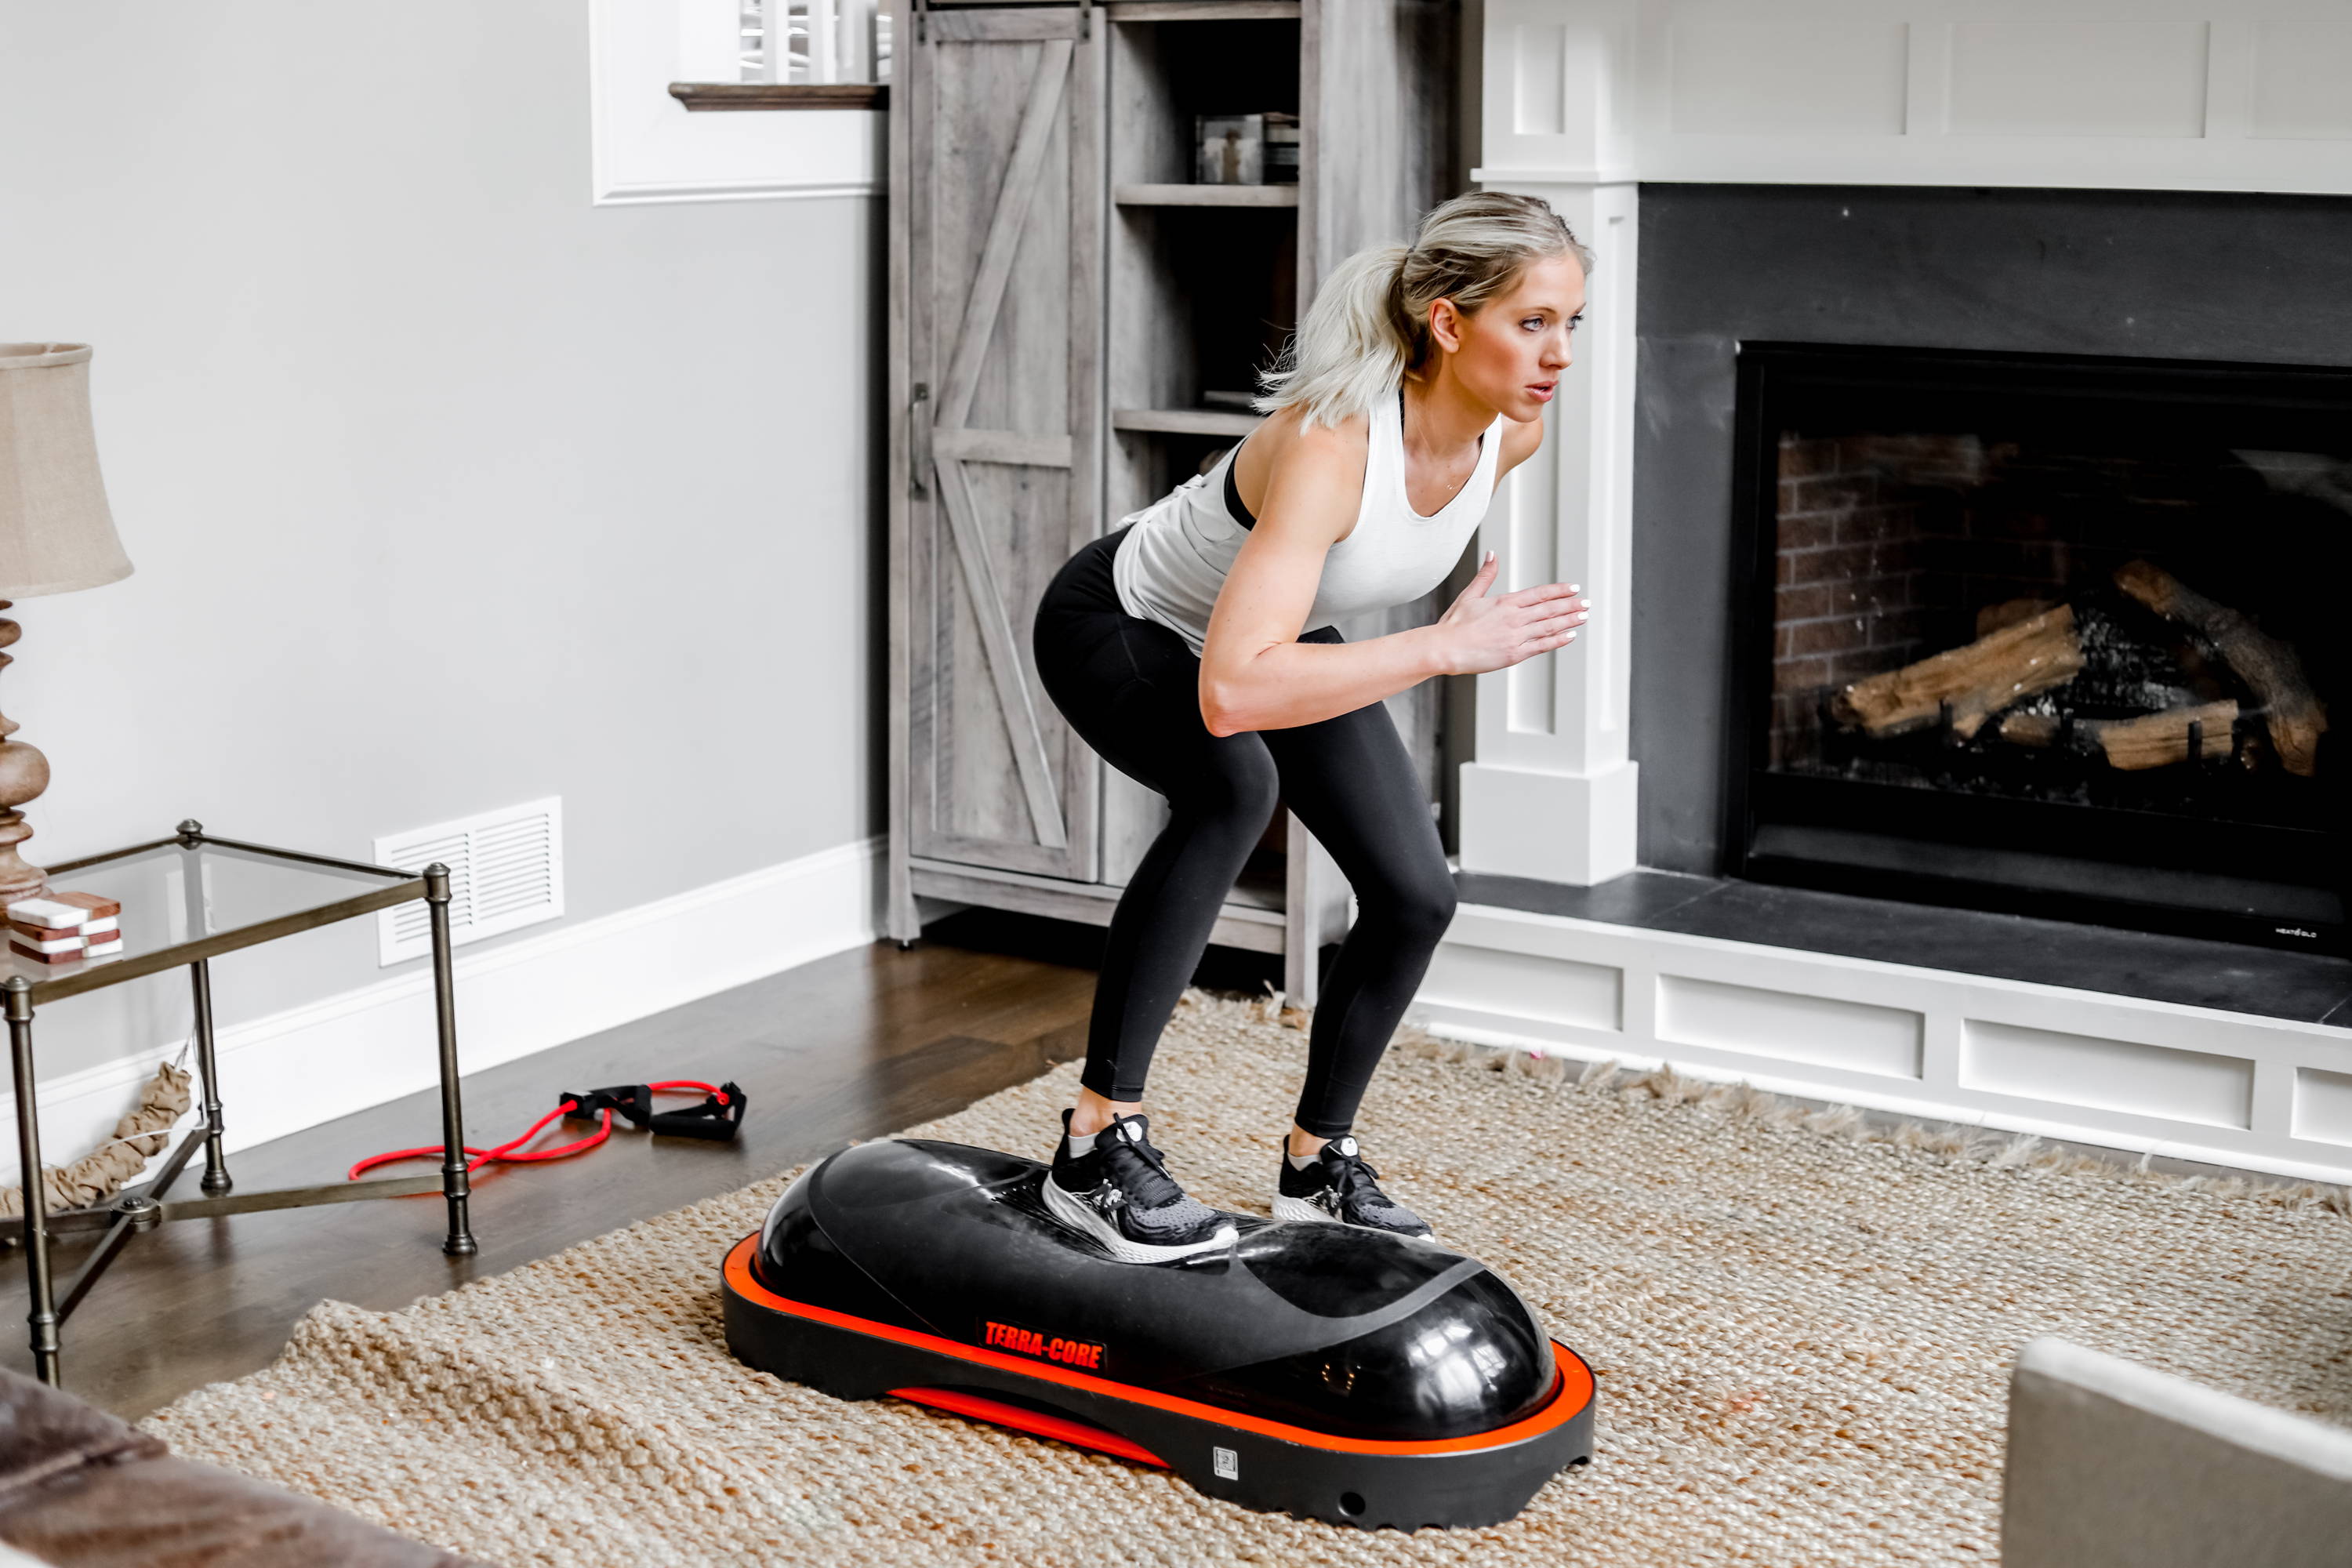 Top 10 Balance Trainers For Home Use. – Terra-Core Fitness